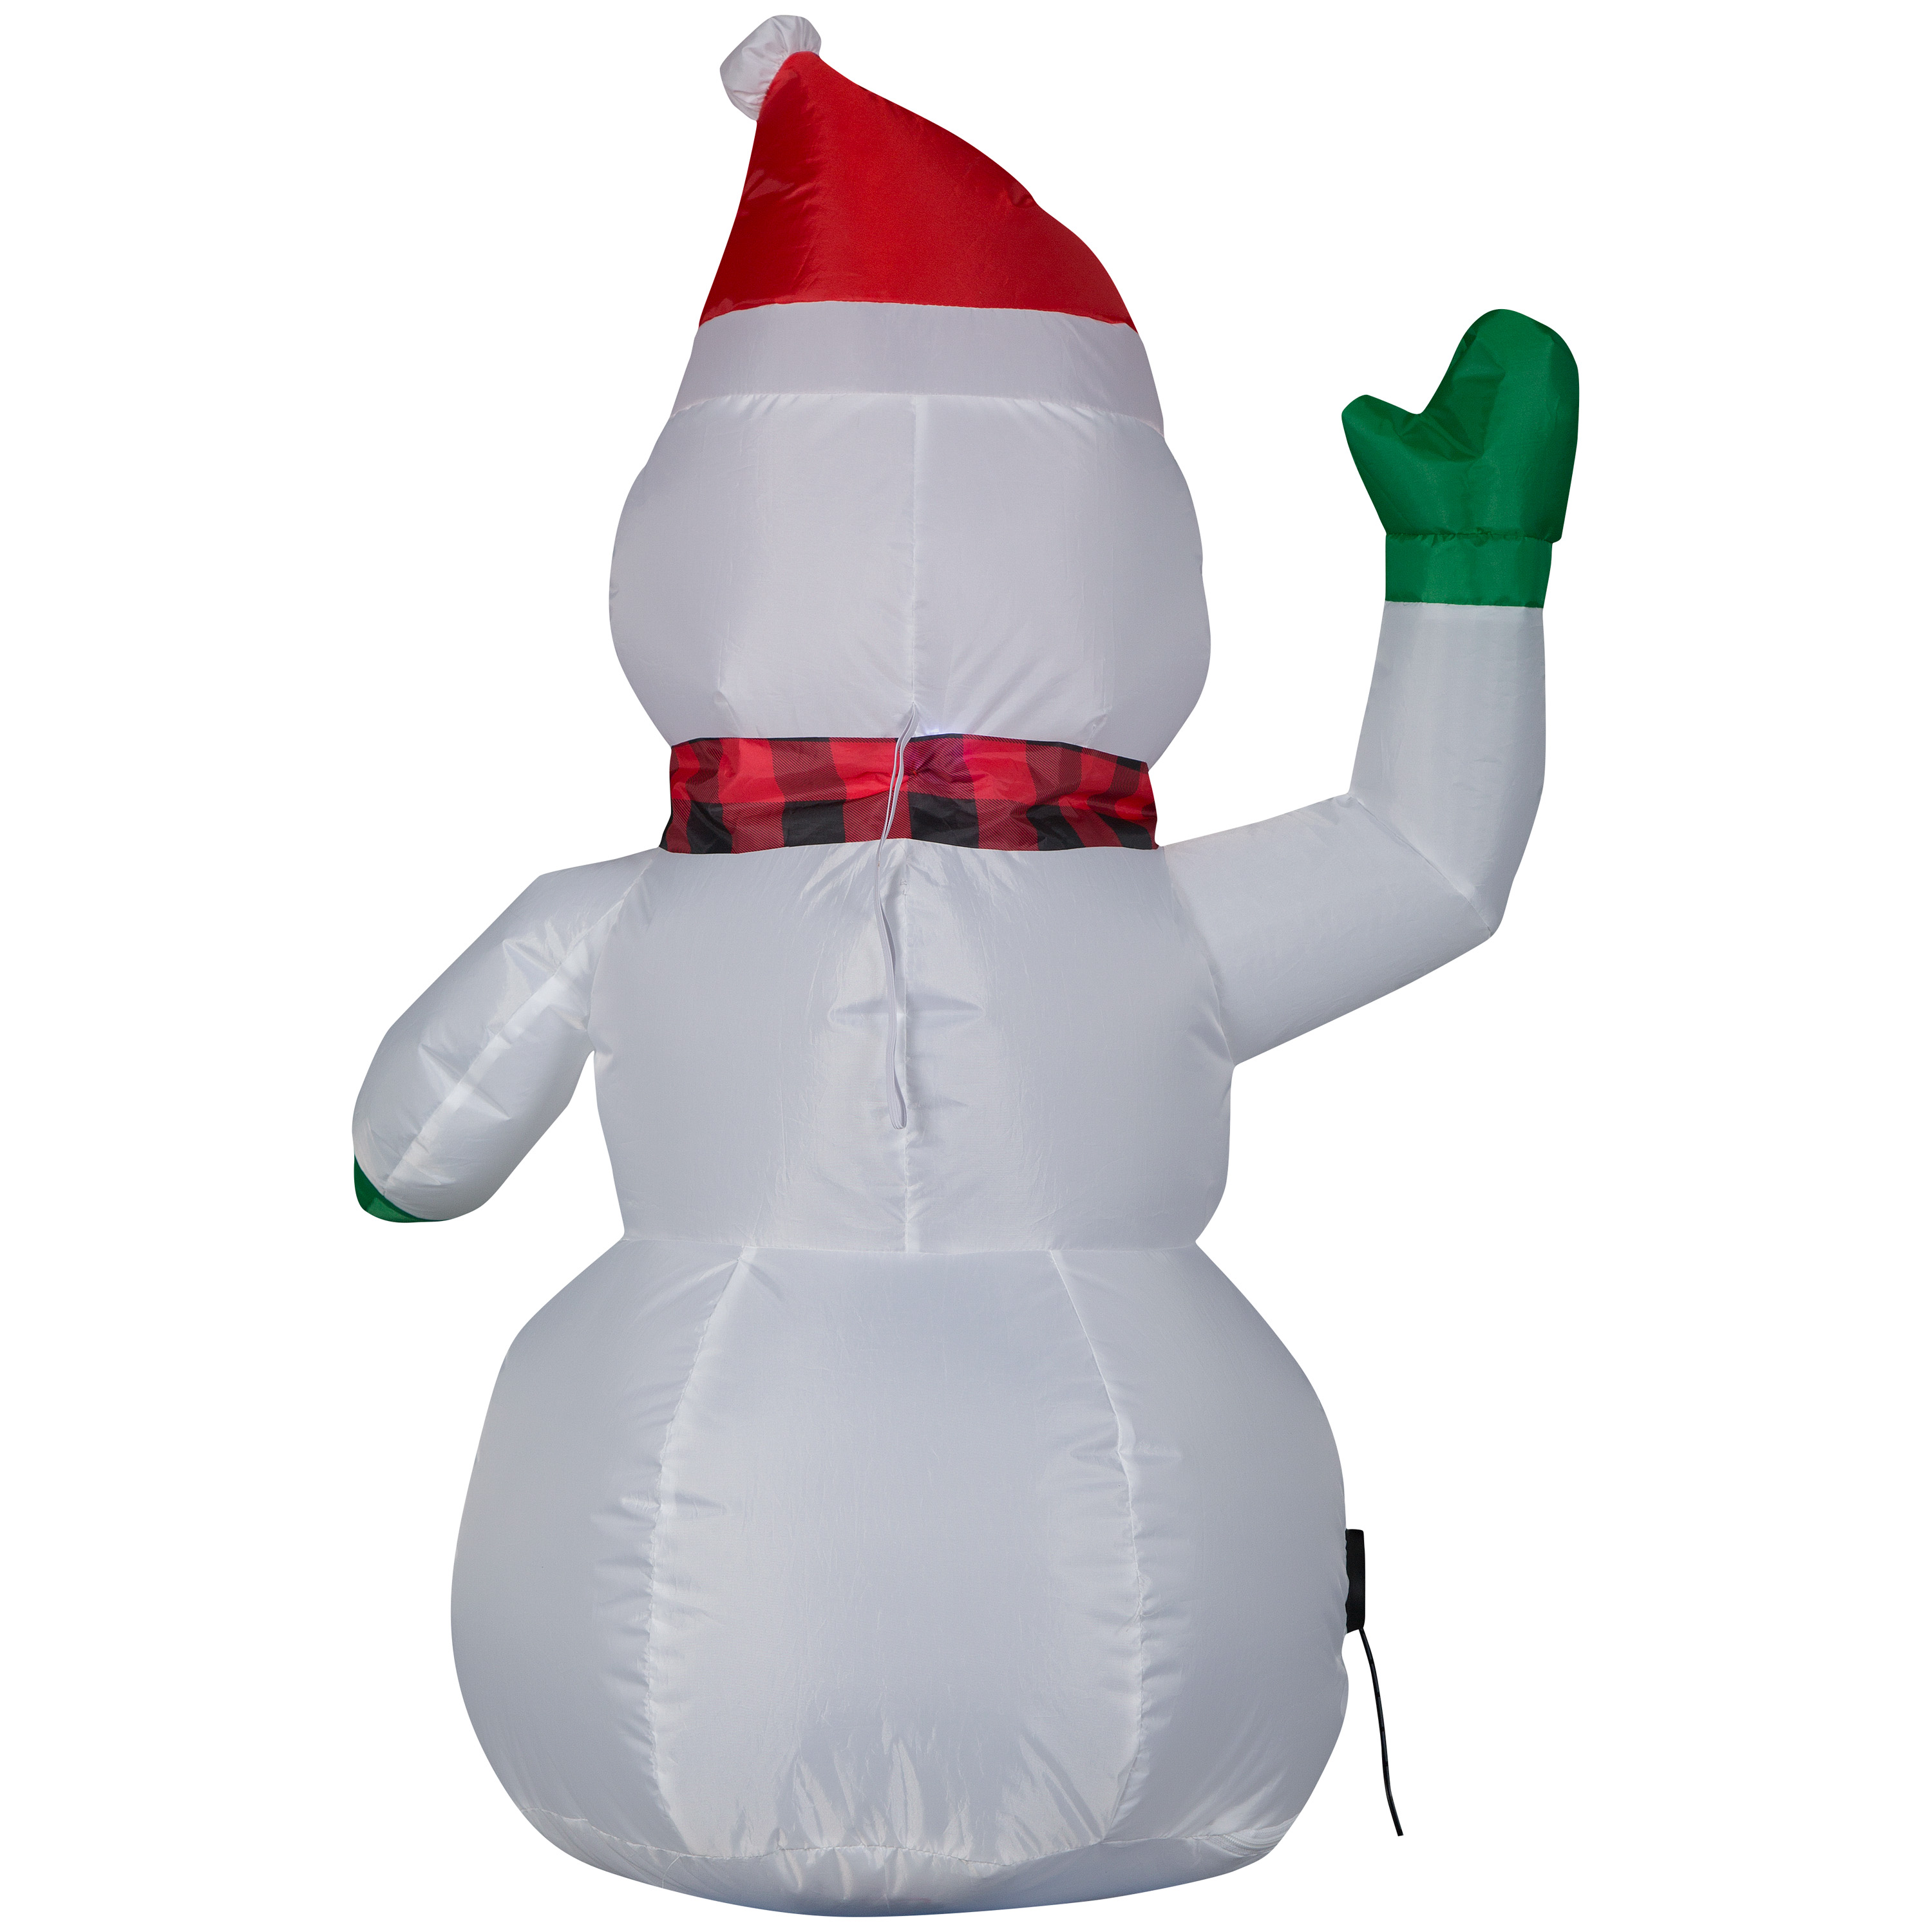 Airblown Inflatables Snowman Car Buddy - image 2 of 6